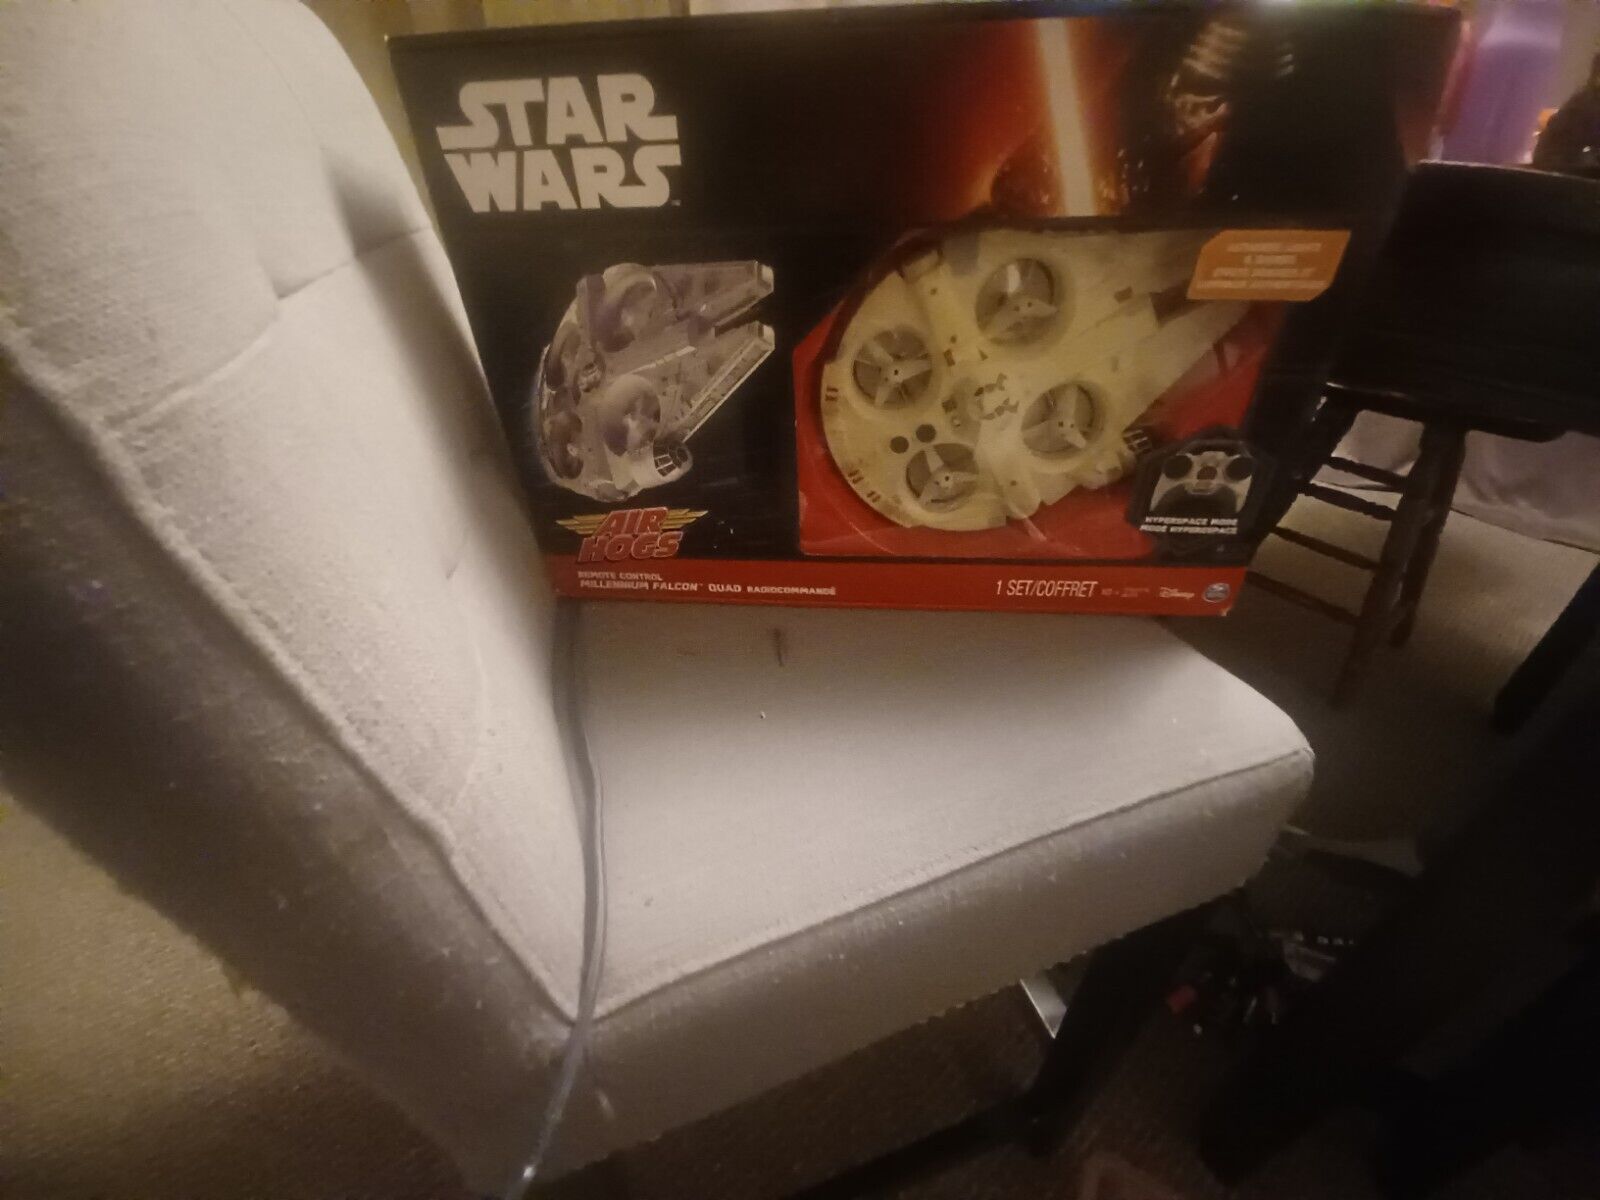 AIR HOGS REMOTE CONTROLLED MILLENNIUM FALCON STAR WARS IN ORIGINAL PACKAGE WORKS